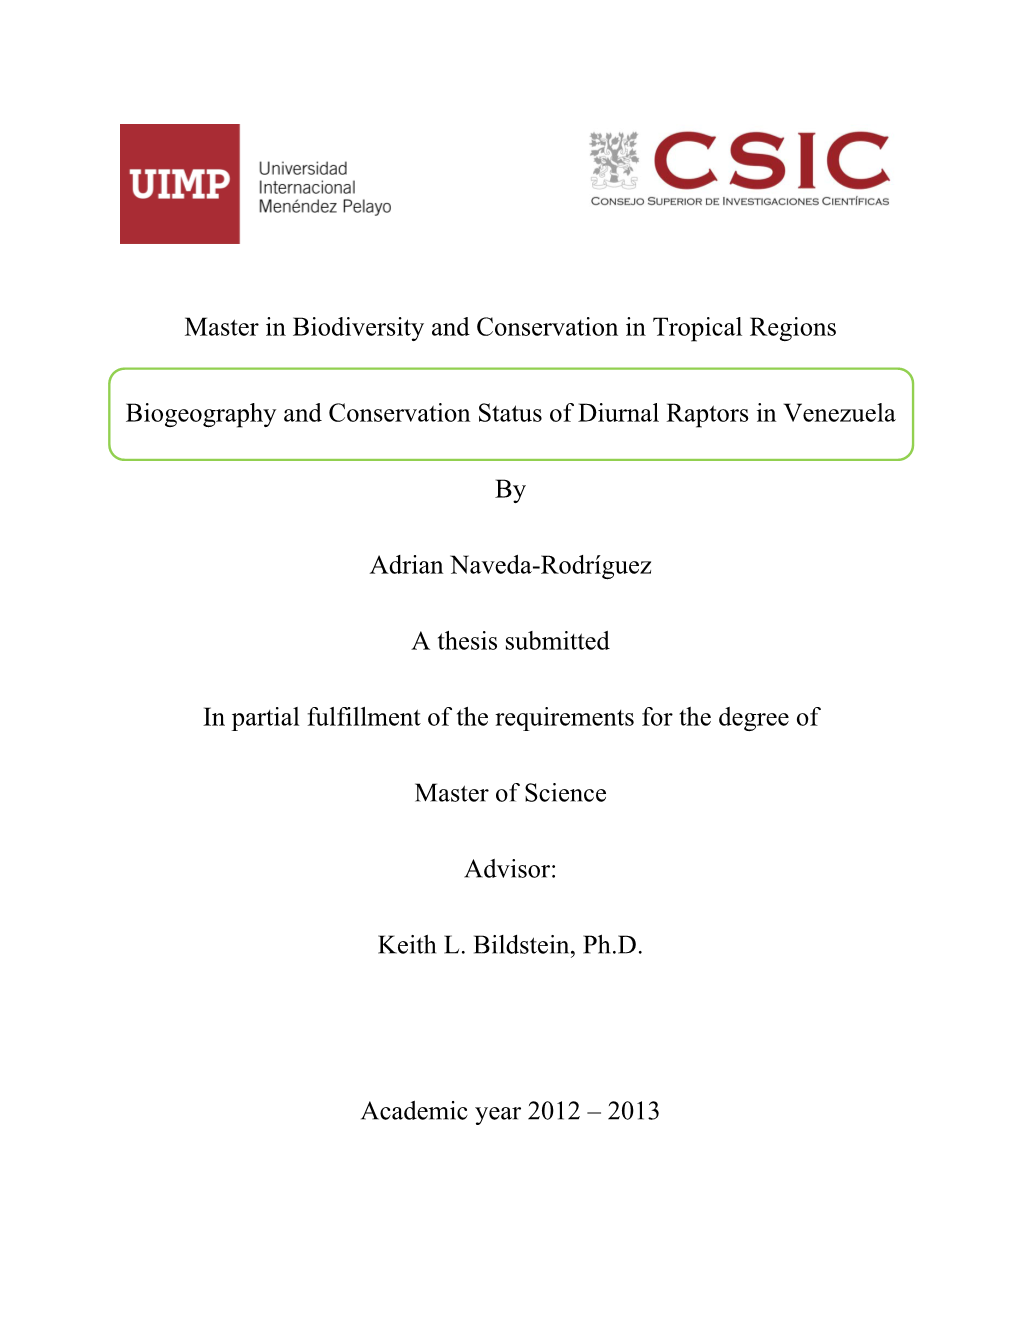 Master in Biodiversity and Conservation in Tropical Regions